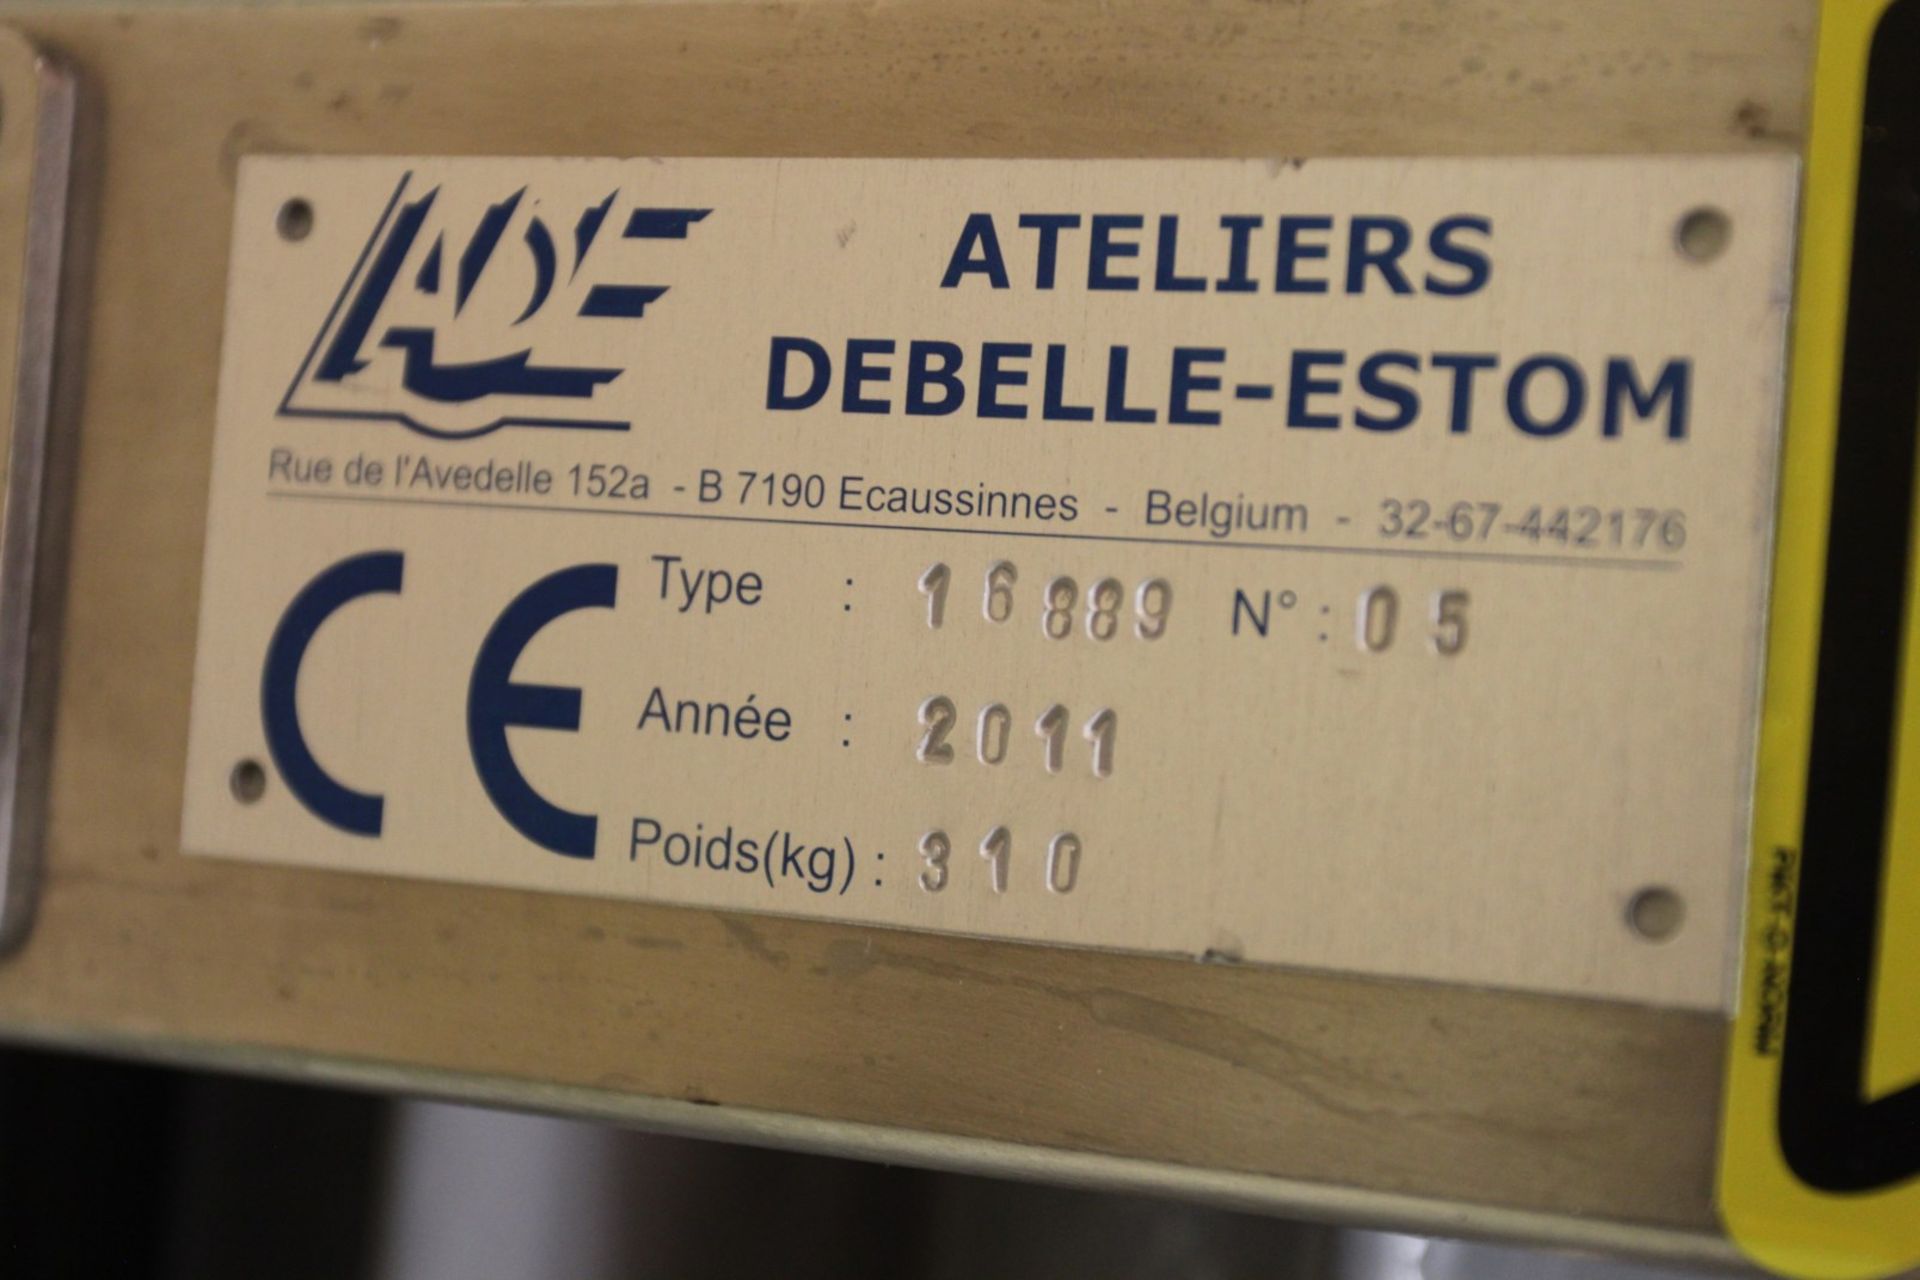 2011 ADE Ateliers Debelle-Estom 16889 Mobile Electric Lift Table, s/n 05 - Image 4 of 5